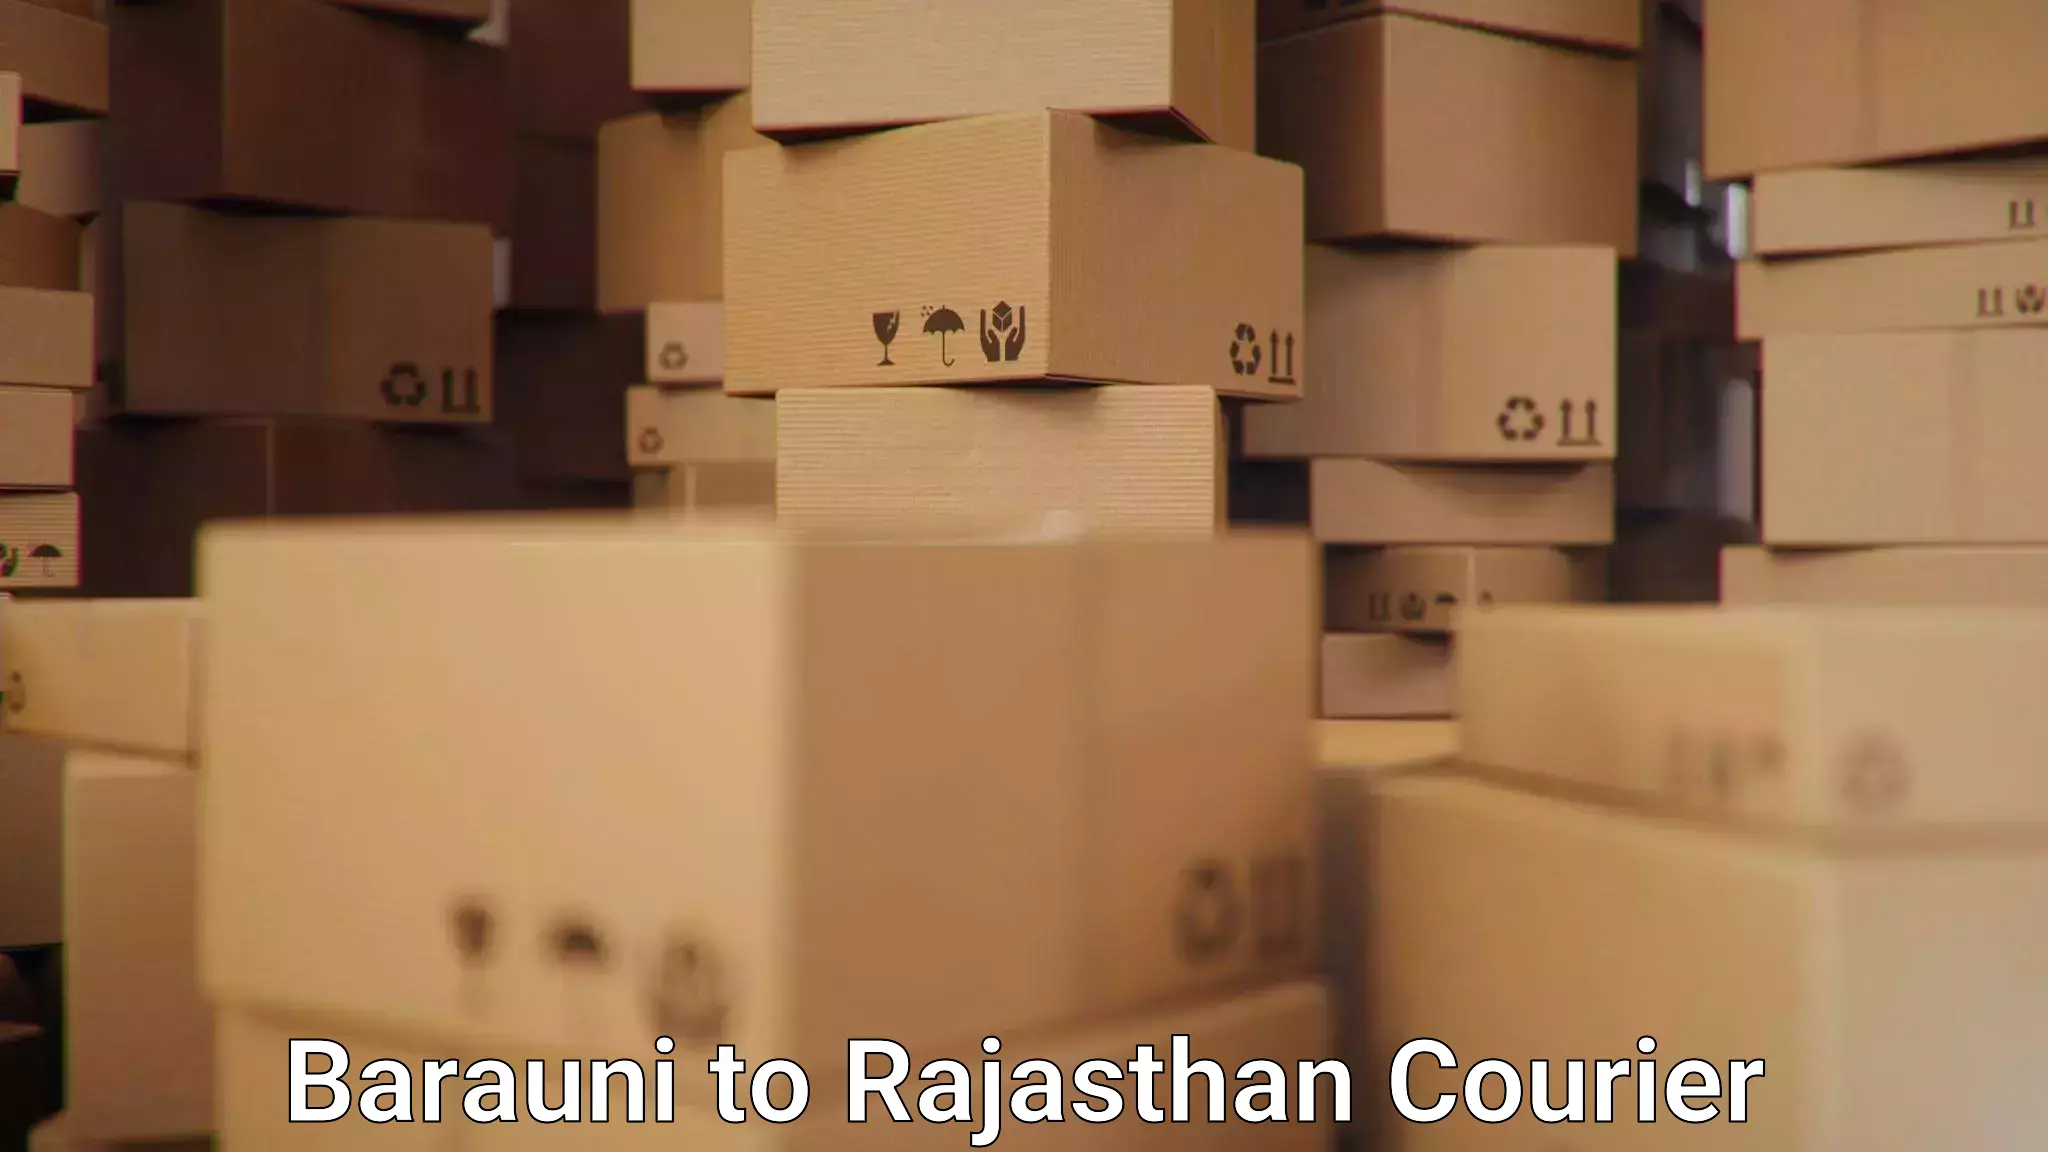 Courier service innovation Barauni to Bassi